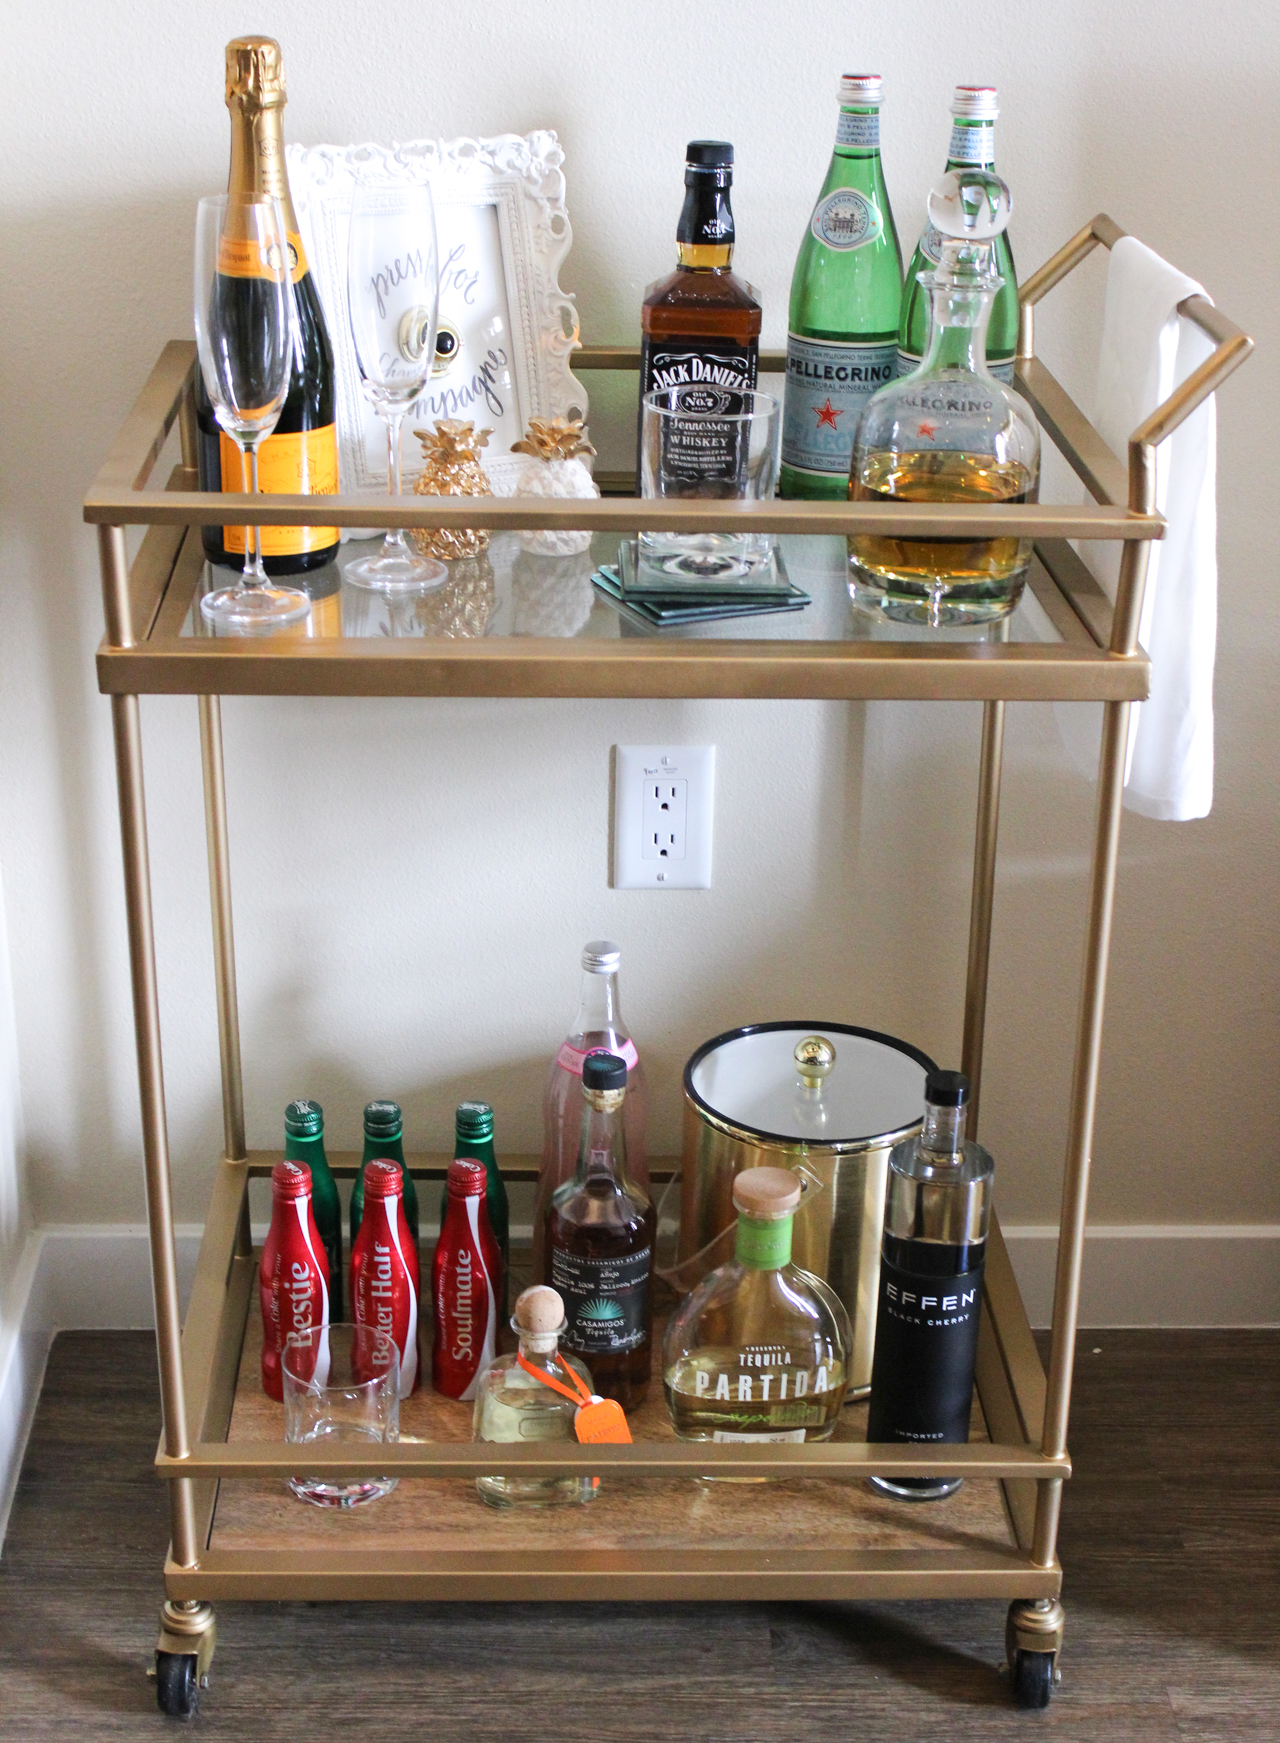 How To Style a Bar Cart | StyledbyBlondie.com